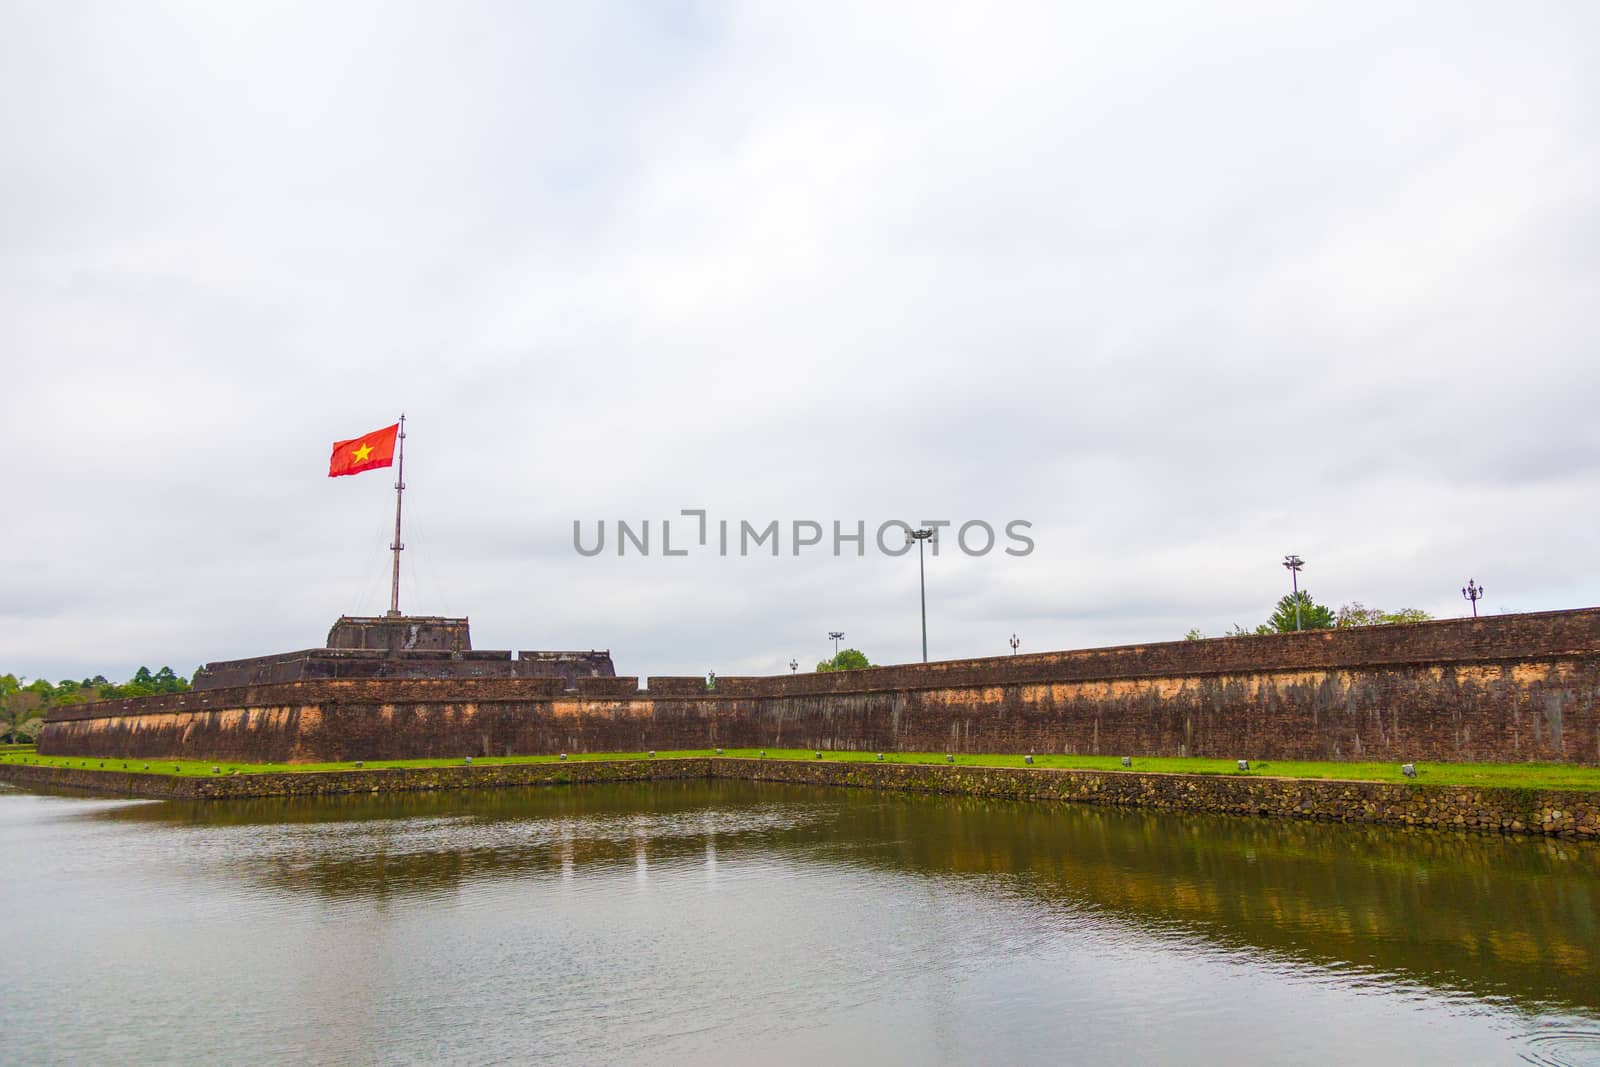 Hue, old capital of Vietnam from 1802 to 1945.. Architecture and details of buildings. A major attraction is its vast, 19th-century Dai Noi Citadel, surrounded by a moat and thick stone walls. It encompasses the Imperial City, with palaces and shrines. High quality photo